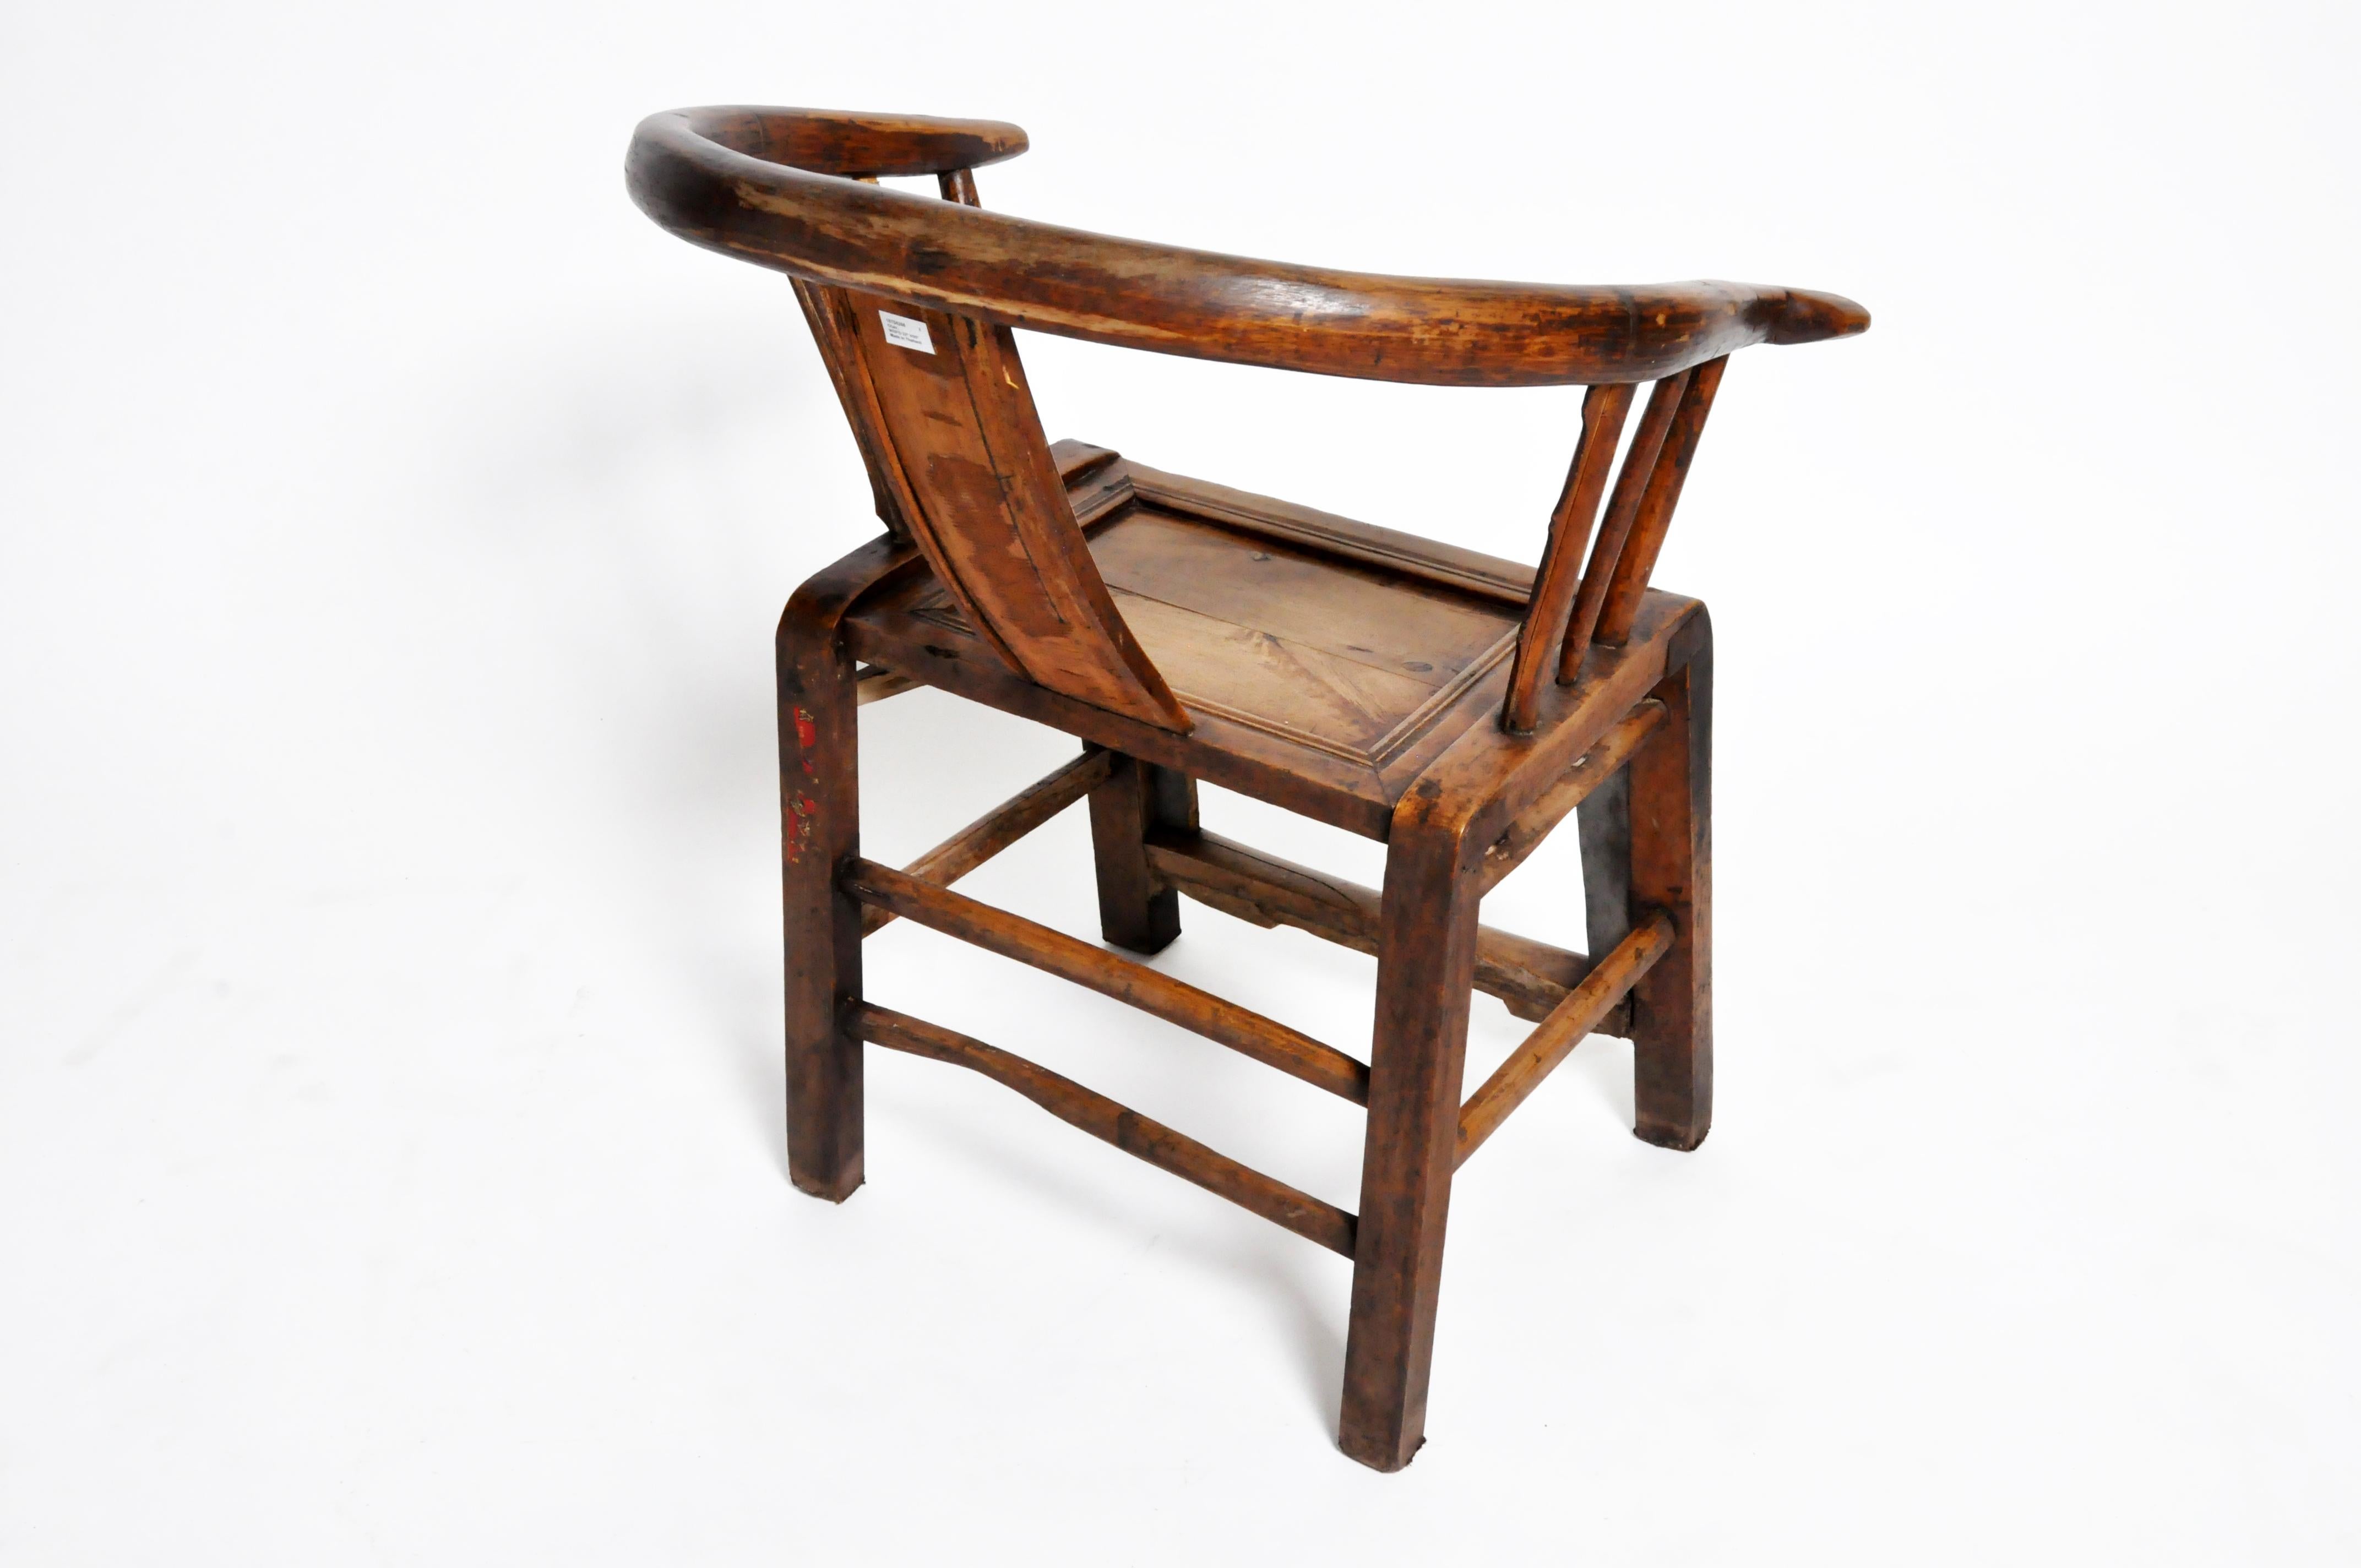 19th Century Pair of Qing Dynasty Horseshoe Shape Round Chairs